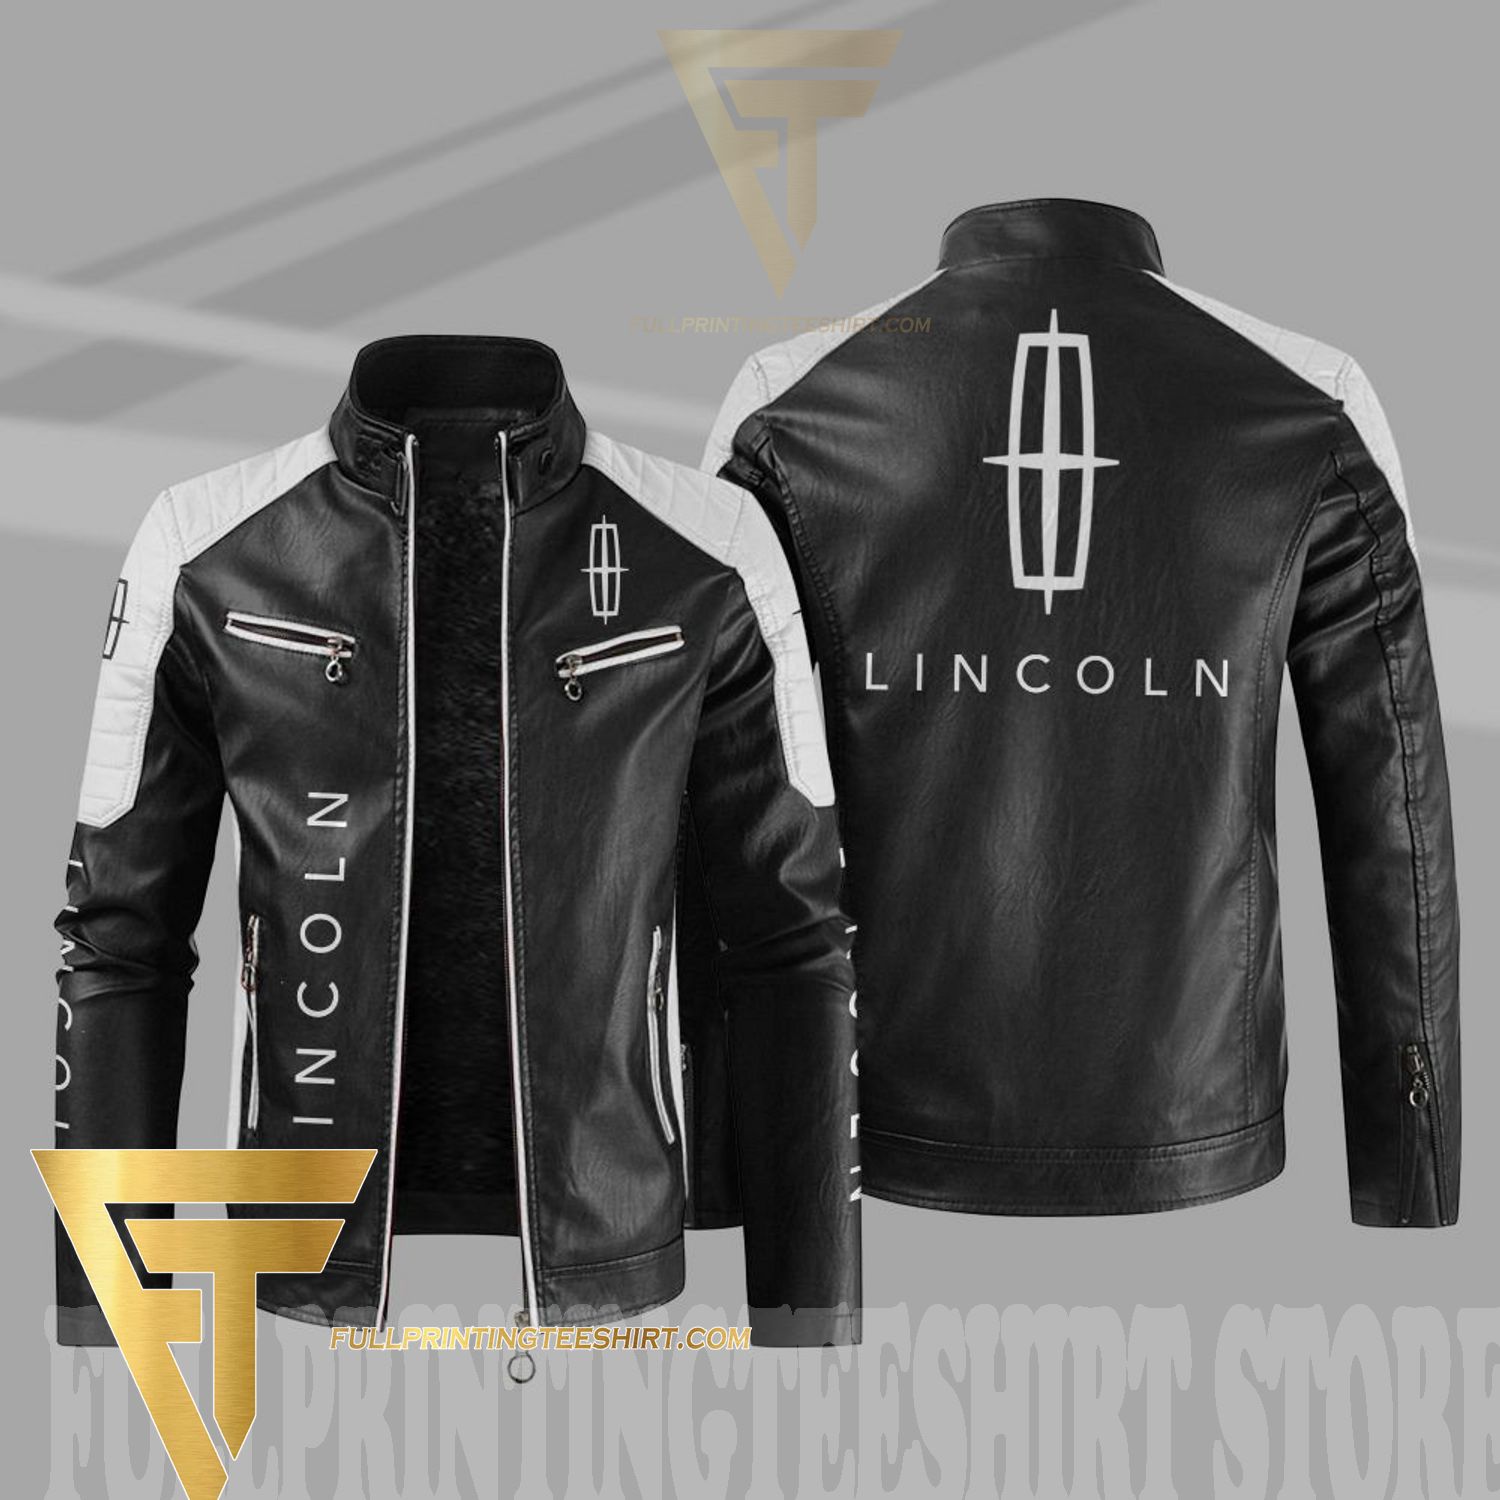 Top-selling item] Lincoln Car Print Jacket Over Symbol All